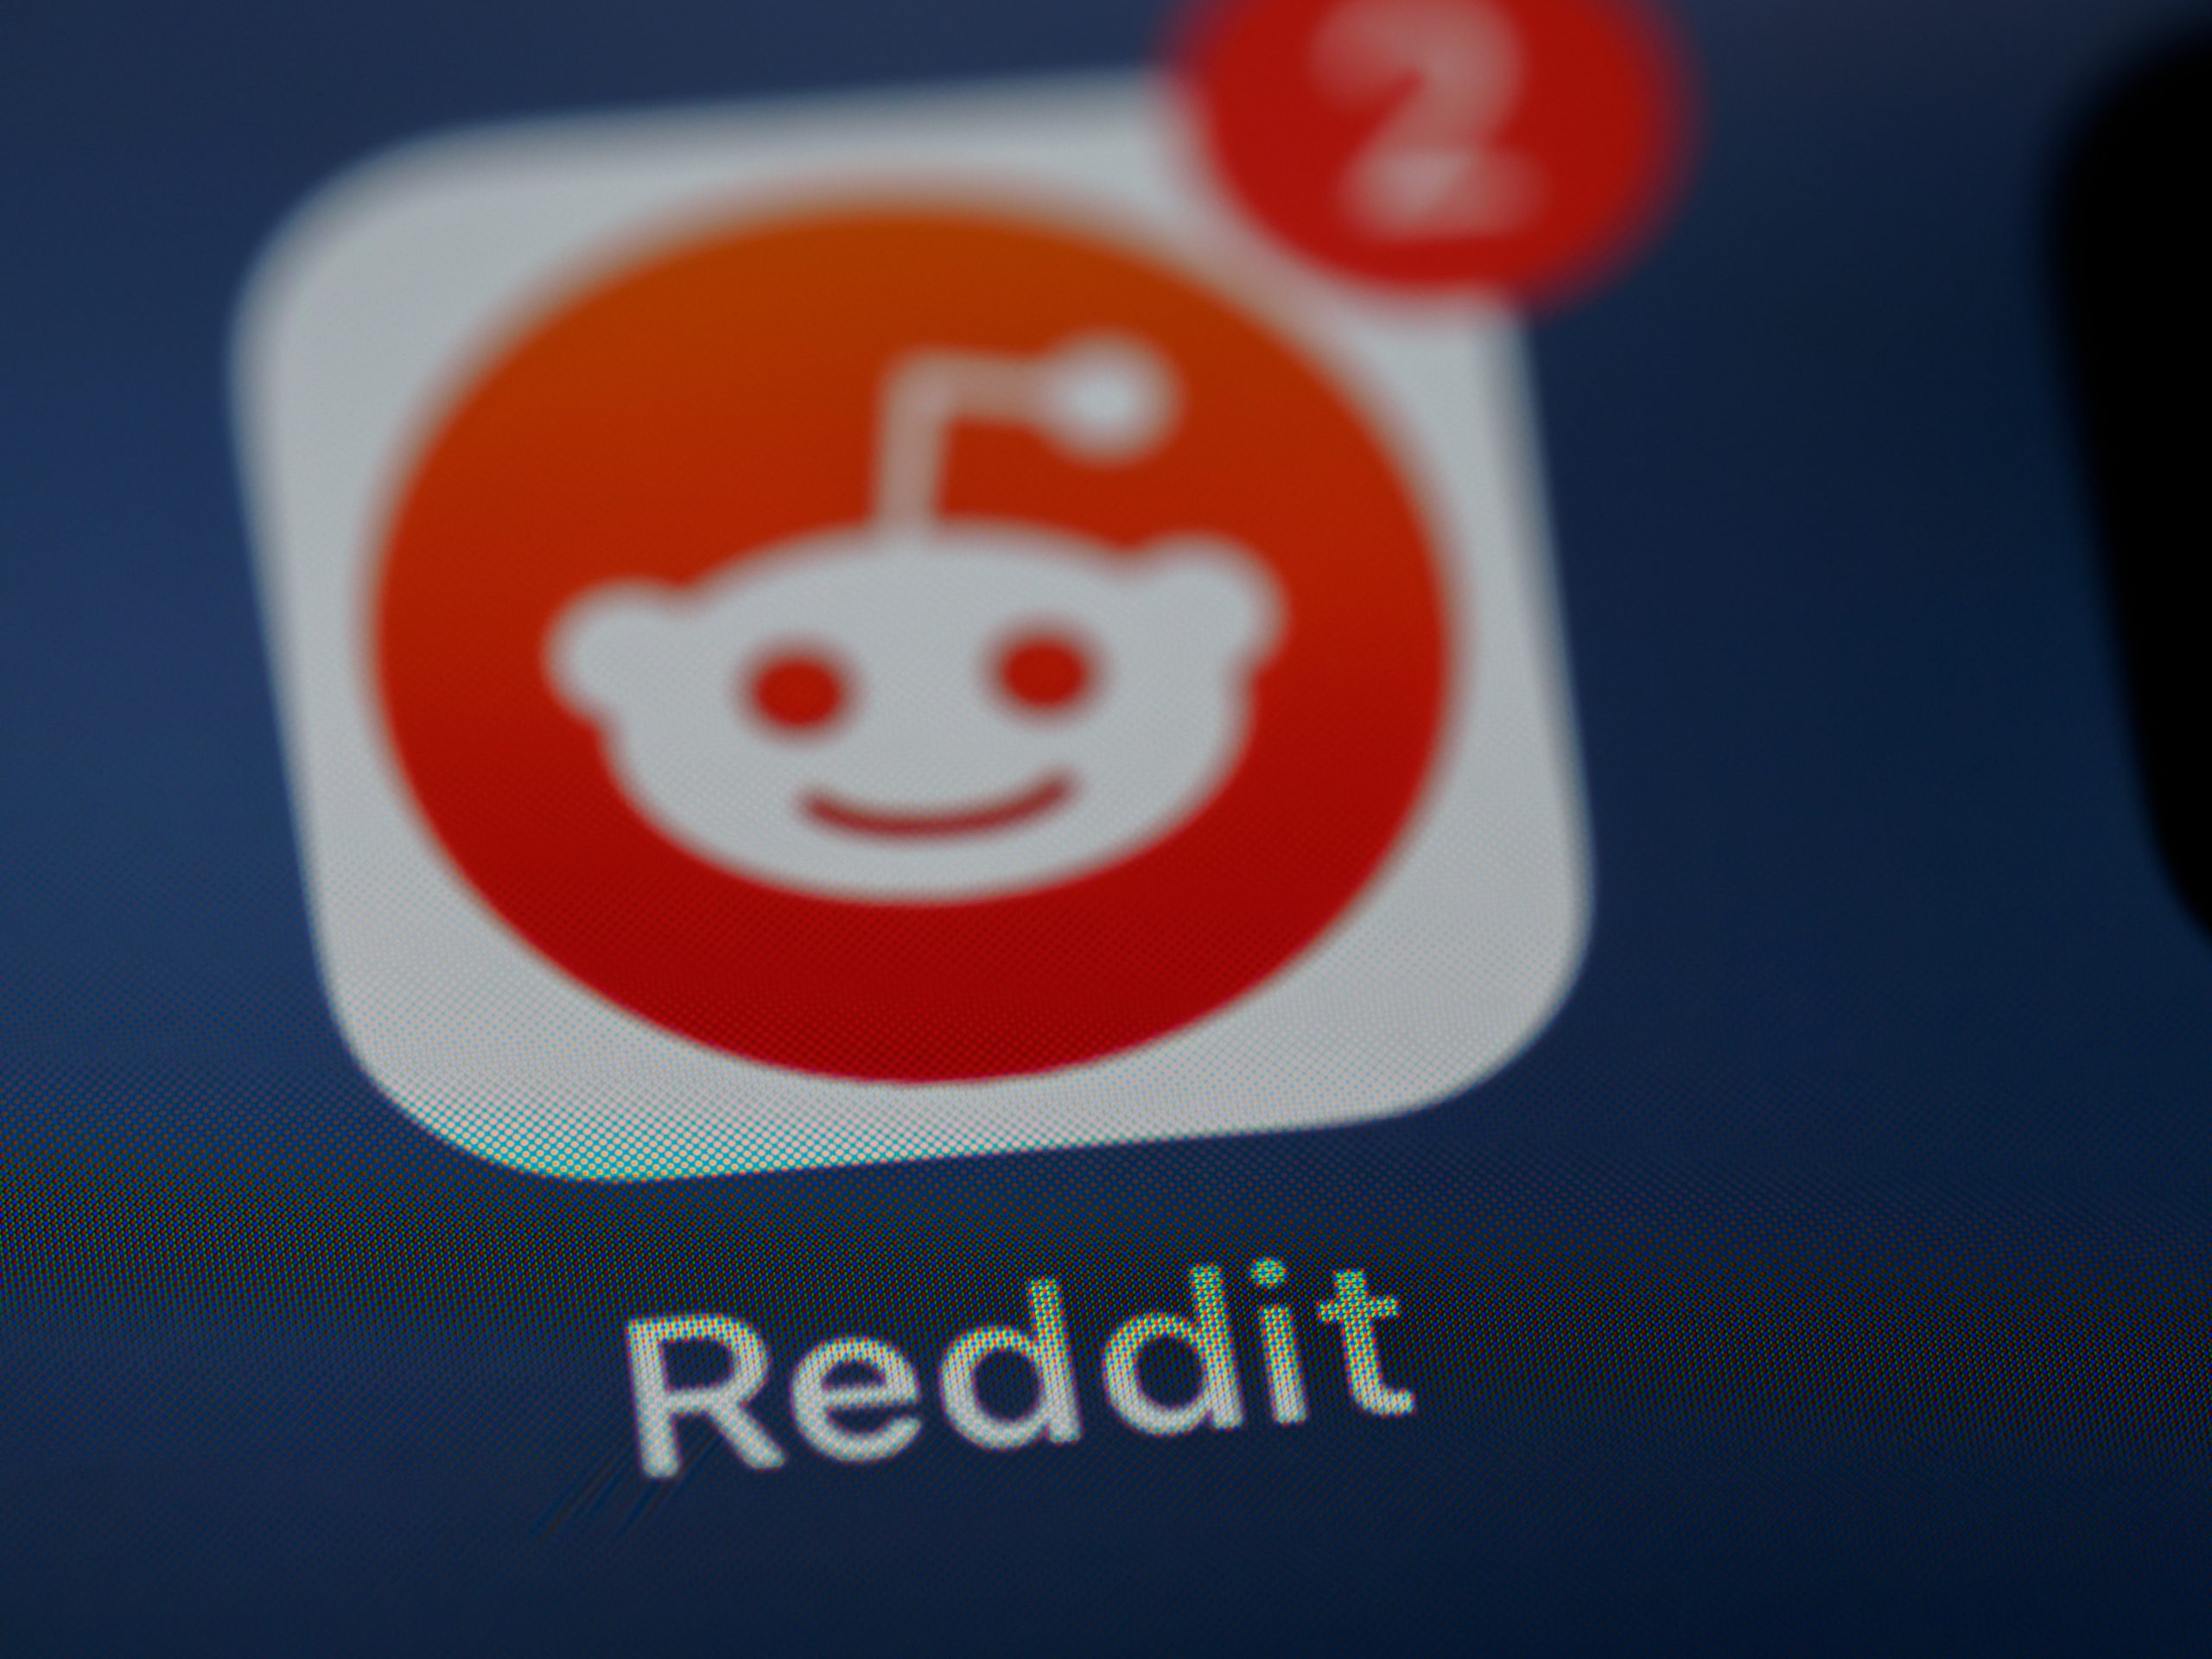 The Reddit app logo, representing the vibrant online community and opportunities for digital engagement and marketing.